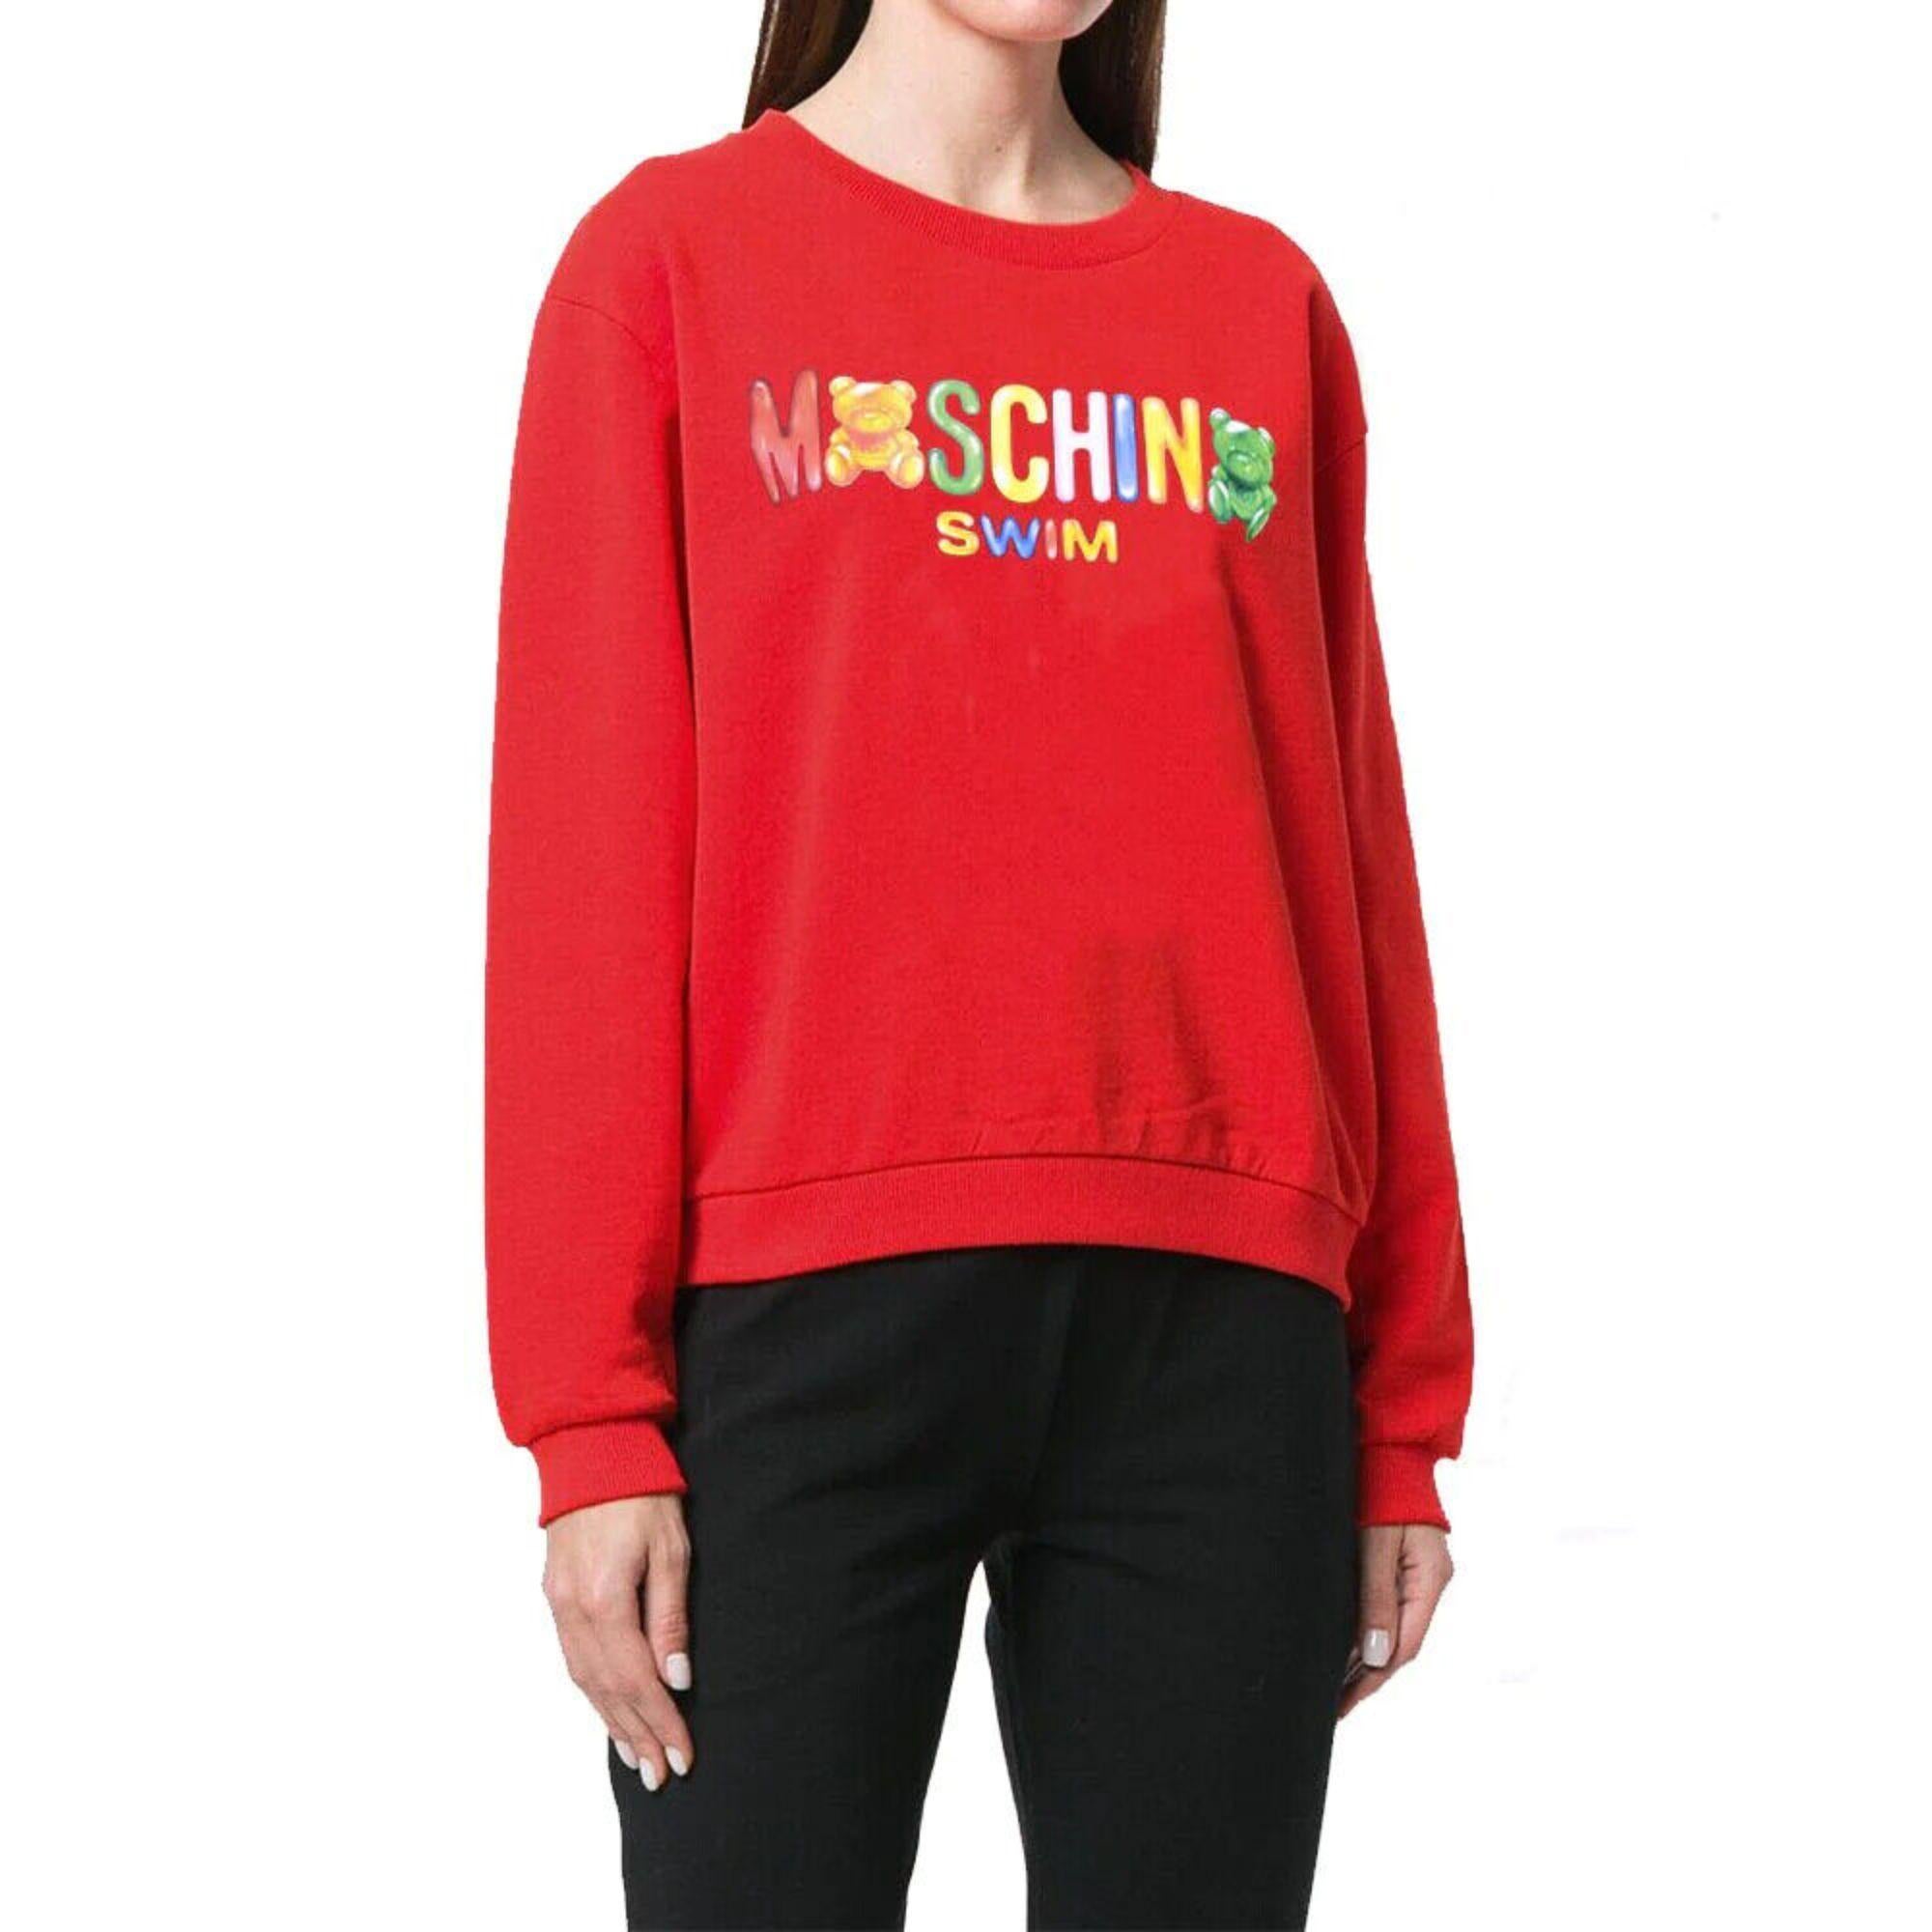 SS19 Moschino Swim Jeremy Scott Swim Jelly Gummy Teddy Bear Red Sweatshirt Candy

Additional Information:
Material: 100% Cotton
Color: Red
Size: L / US M
Style: Pullover
Pattern: Logo, Gummy Bear
Dimensions: Shoulder to shoulder 18.5